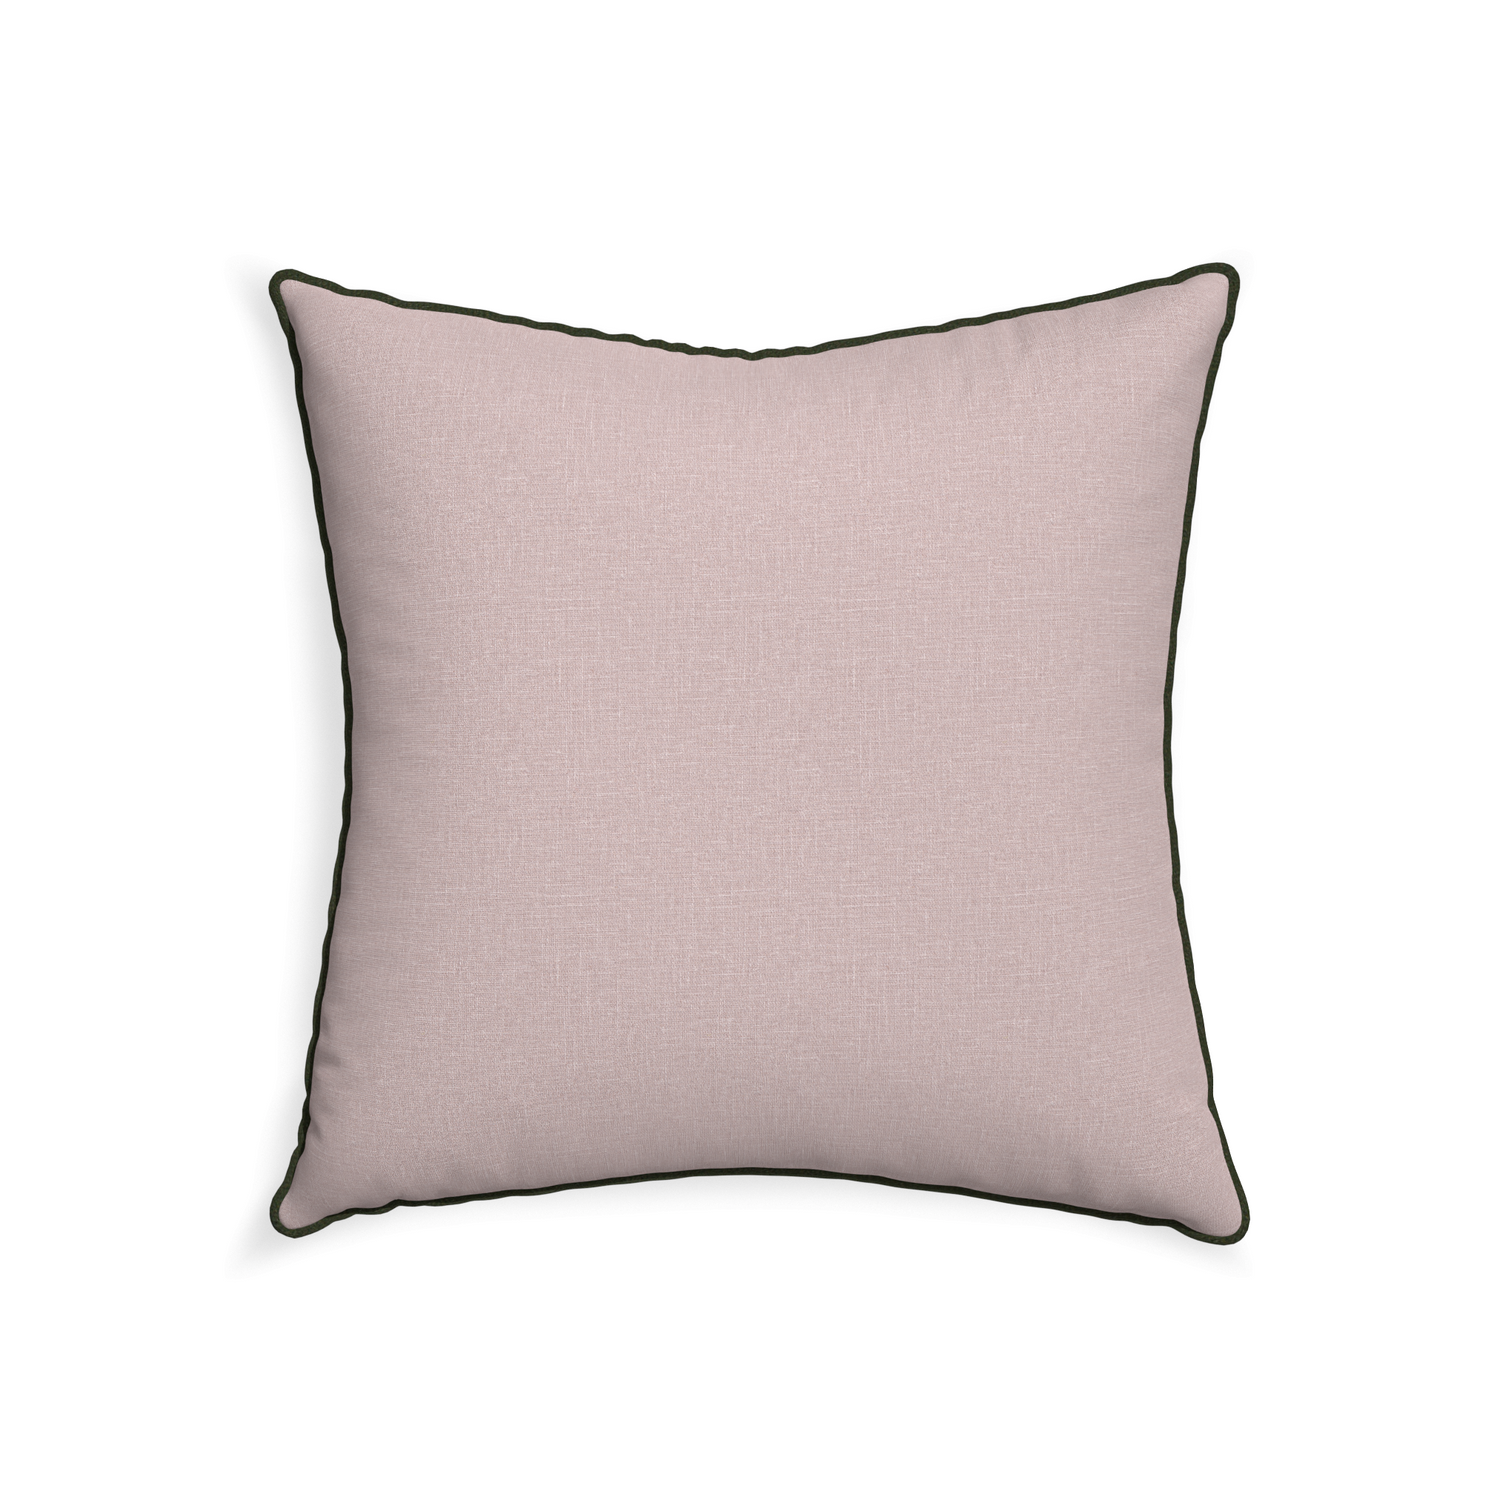 22-square orchid custom mauve pinkpillow with f piping on white background